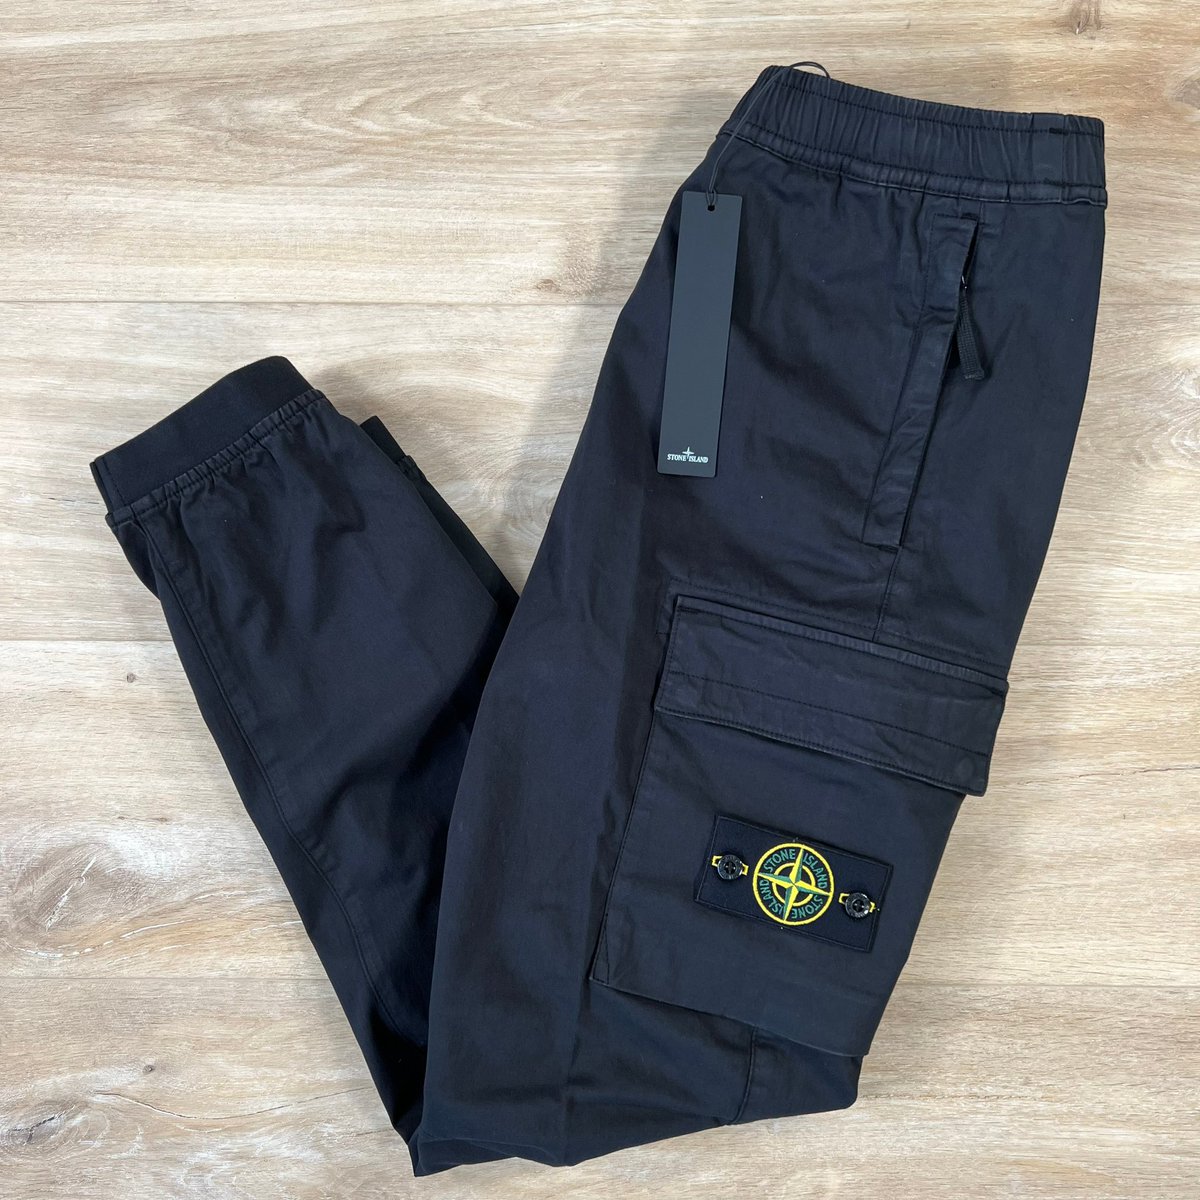 If Haaland scores first against Brighton, we’ll give away a pair of Stone Island cargos! 💙 Retweet & follow @LabelMenswear to enter